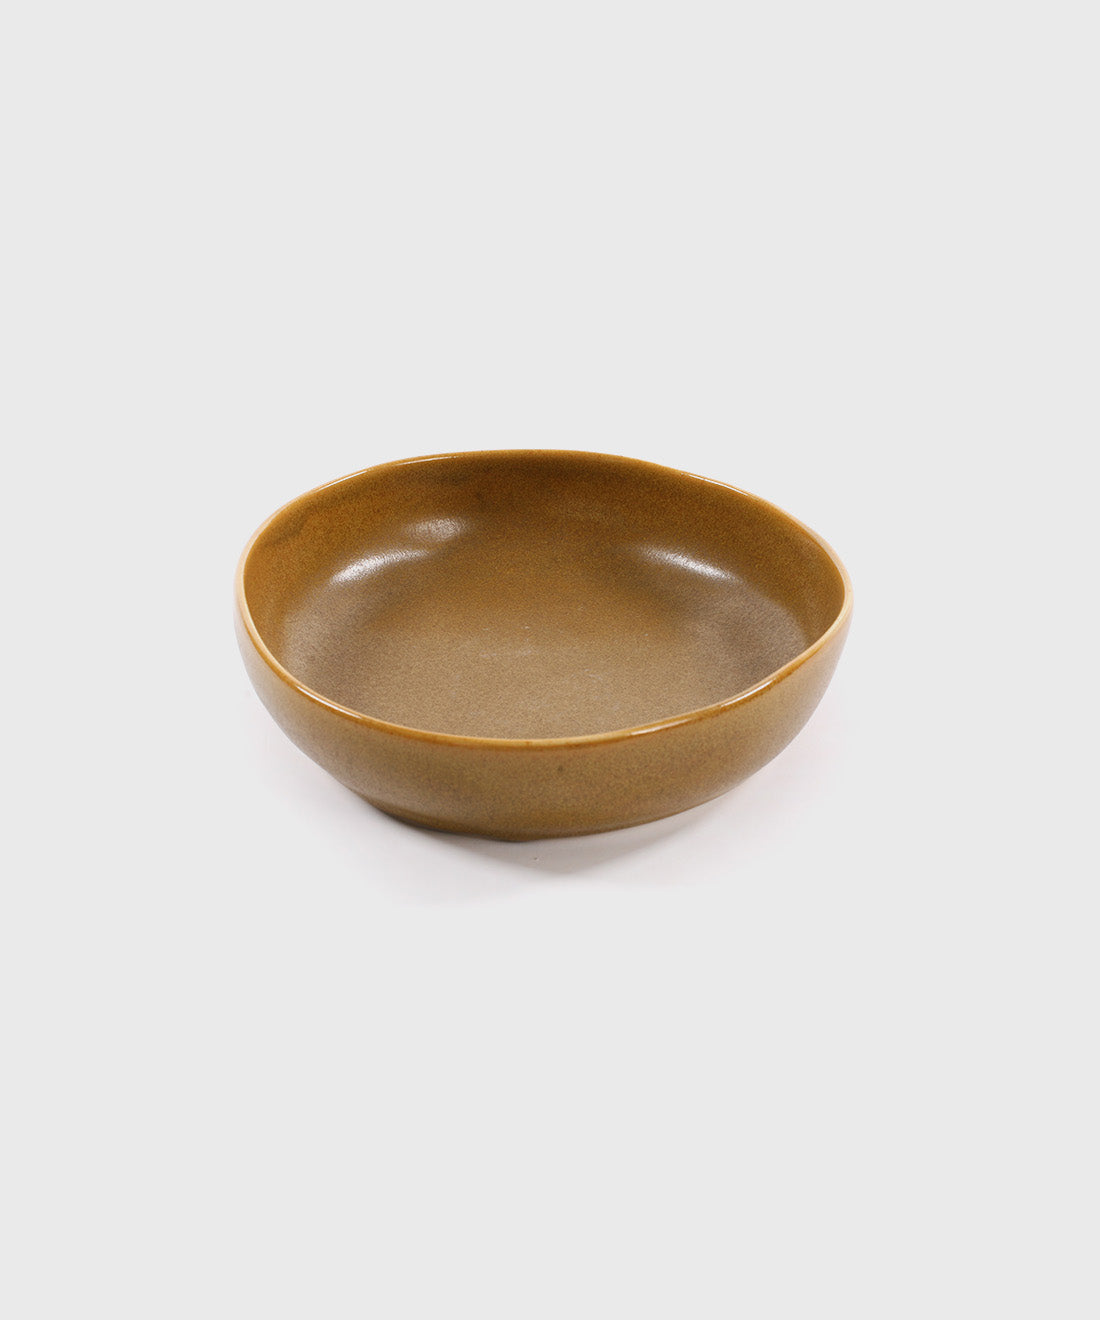 Oyster Bowl in Mustard